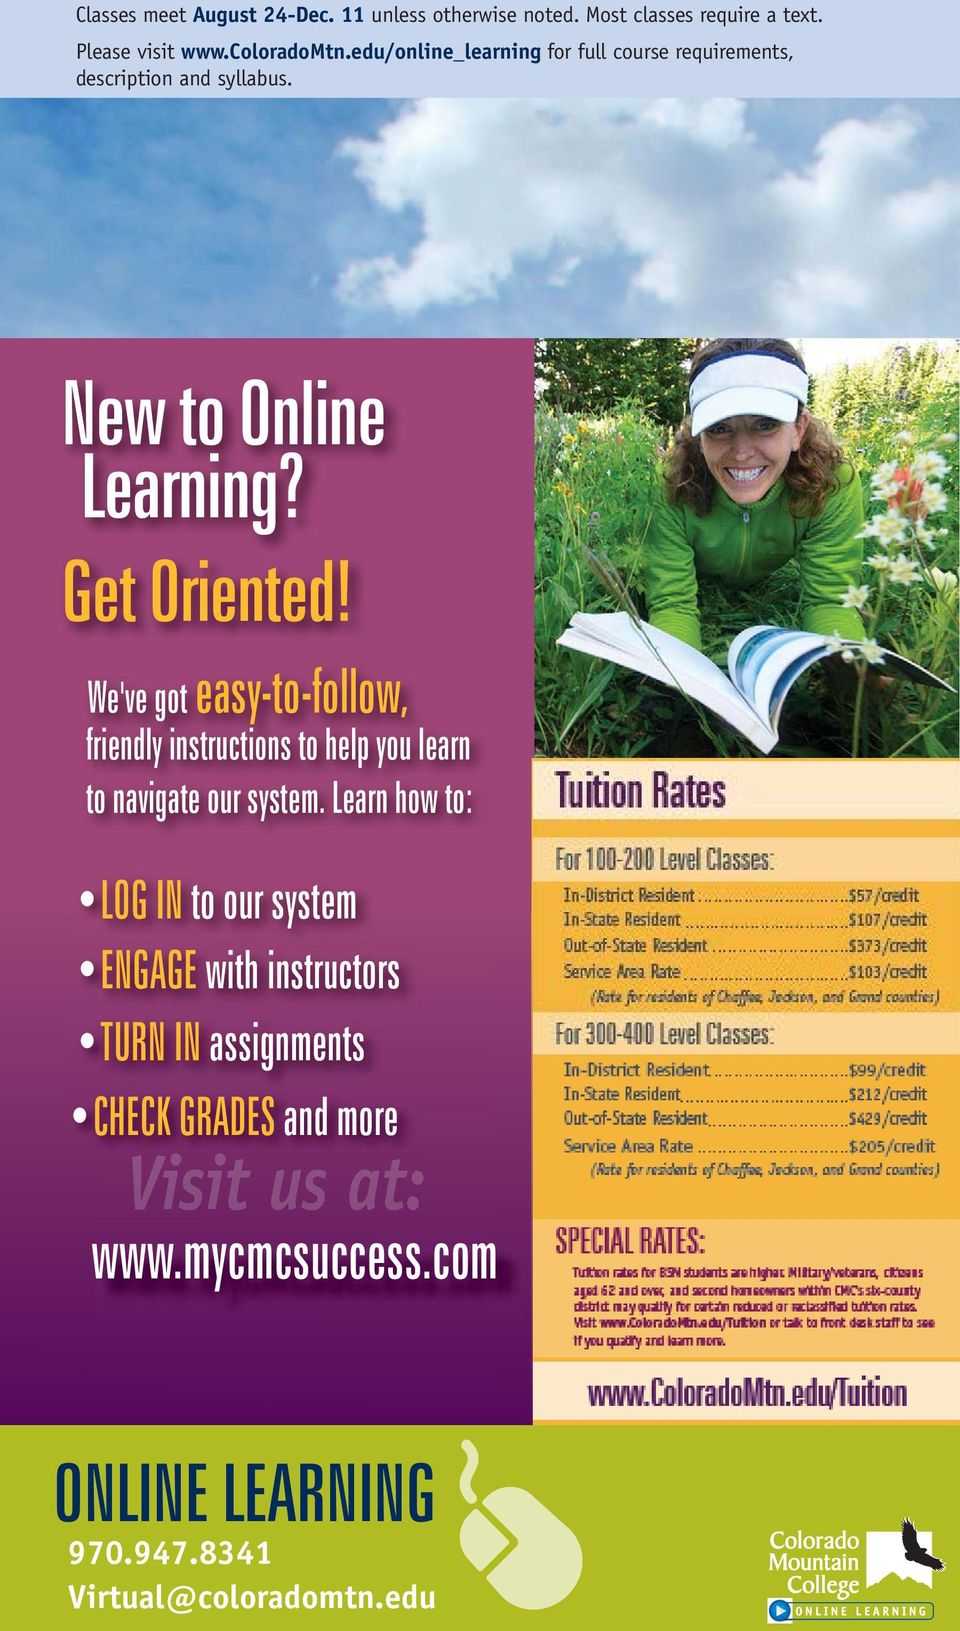 edu/online_learning for full course requirements, description and syllabus. New to Online Learning? Get Oriented!